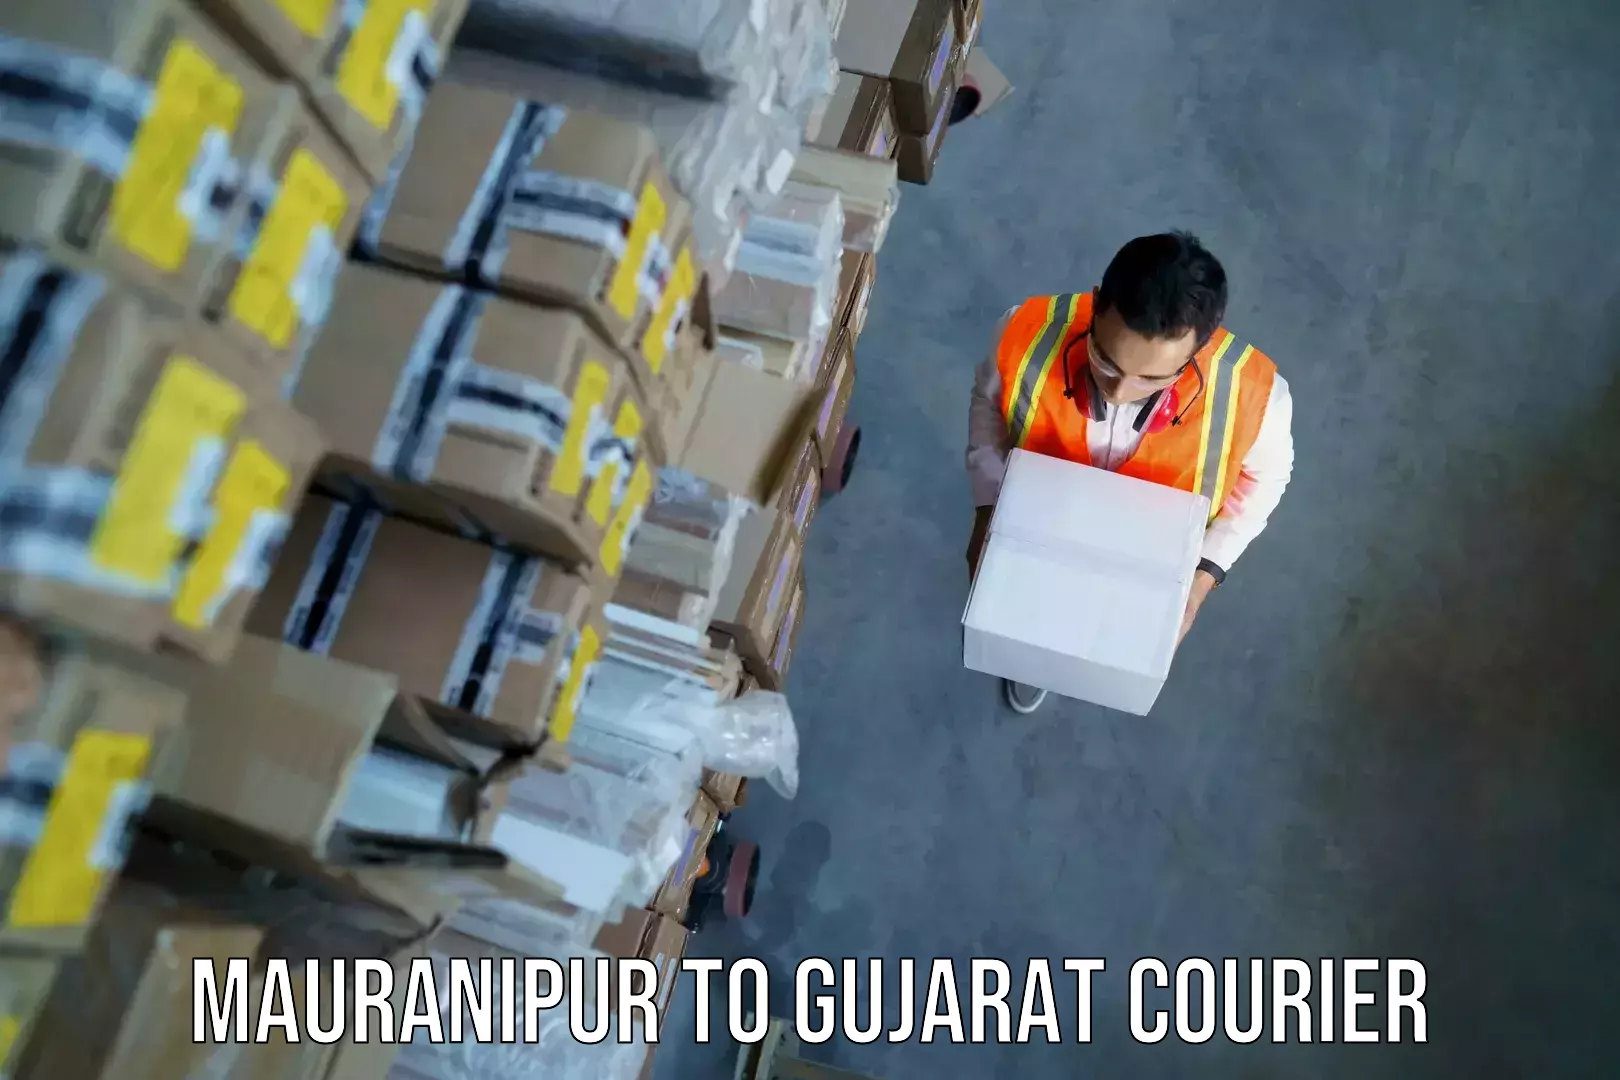 Baggage shipping quotes Mauranipur to Dwarka